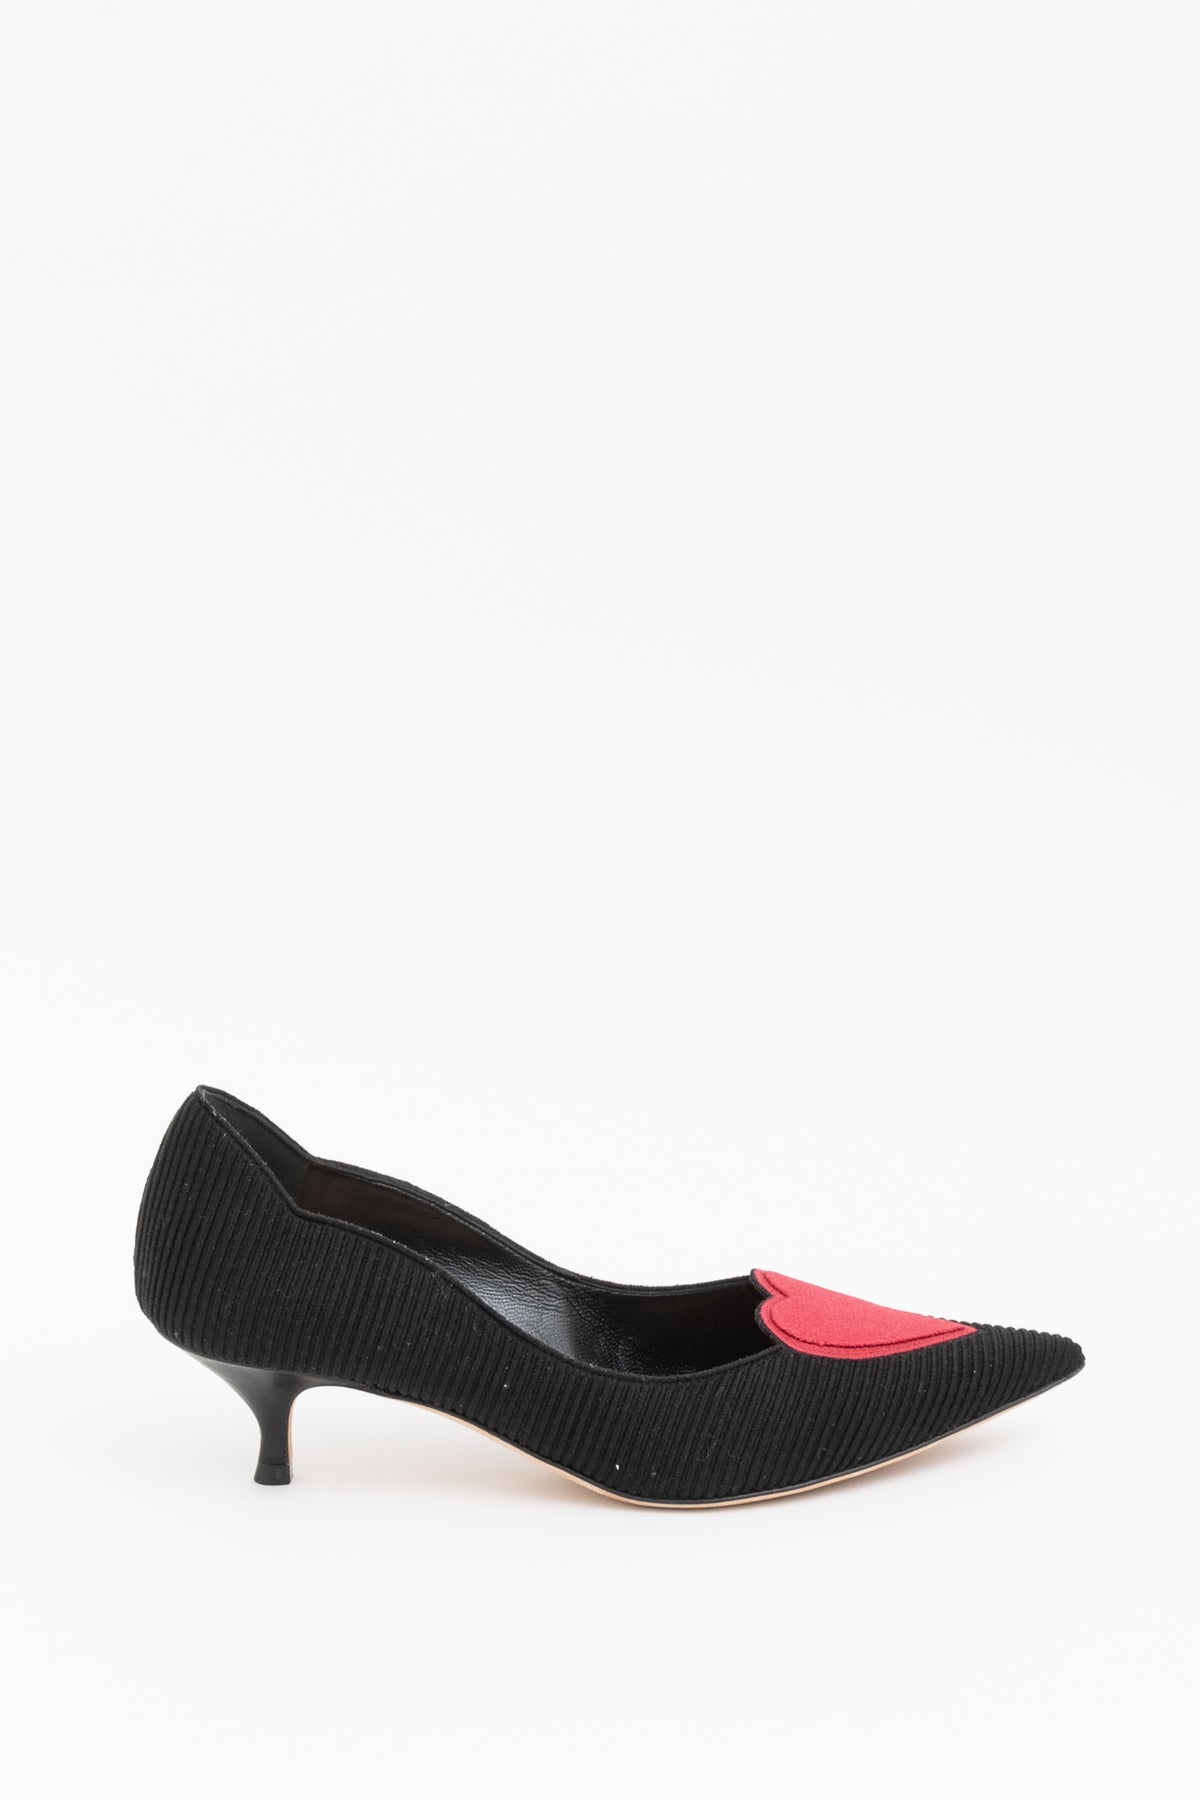 Black and Red Heart Pumps